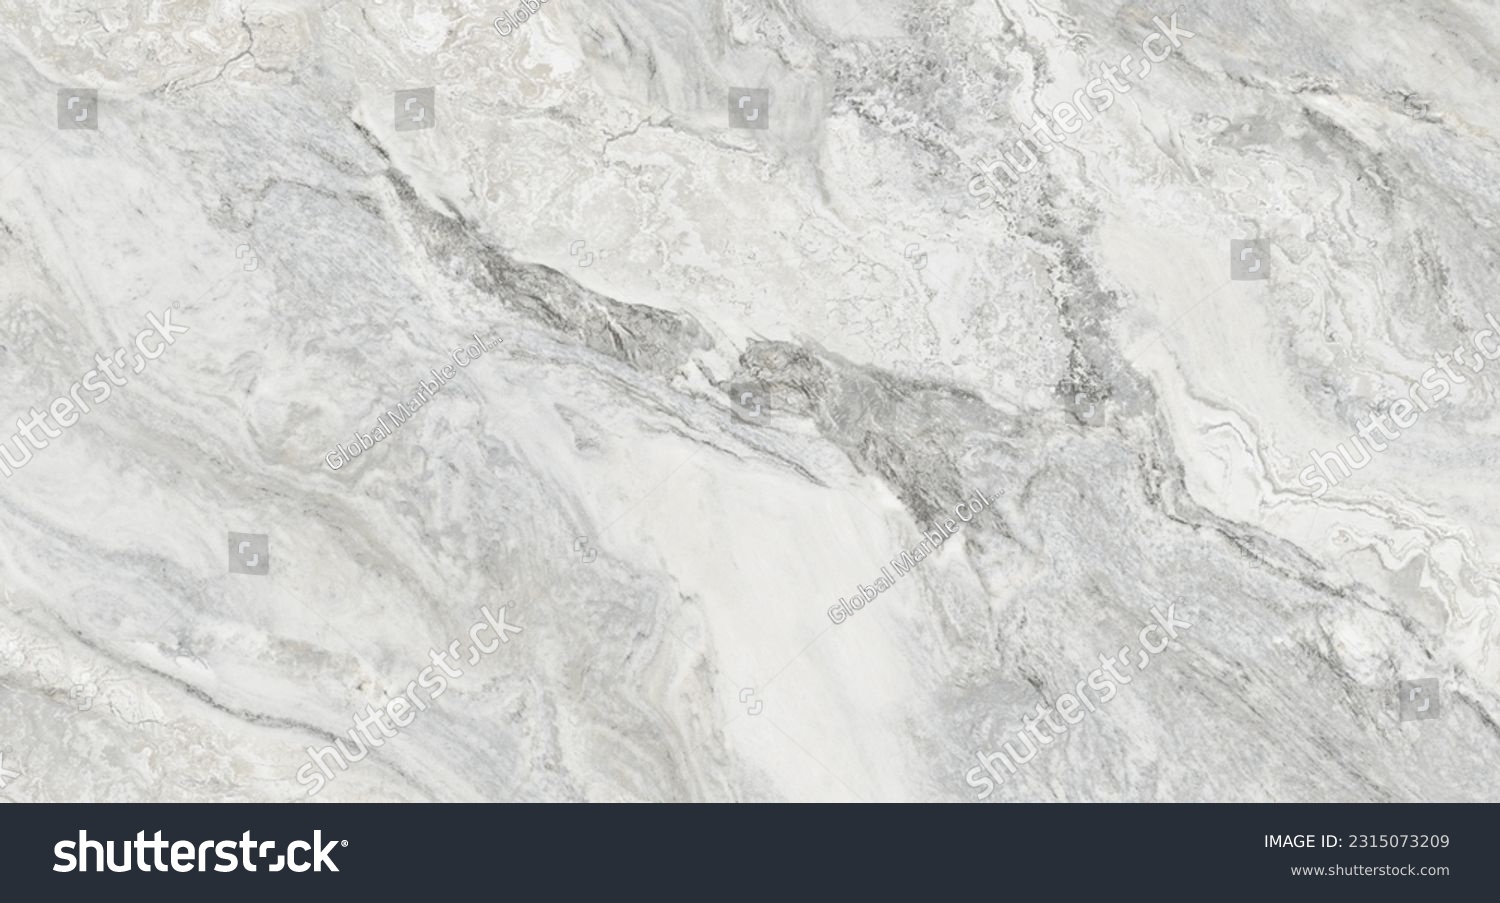 Marble texture background with high resolution, Italian marble slab, The texture of limestone or Closeup surface grunge stone texture, Polished natural granite marbel for ceramic digital wall tiles. #2315073209